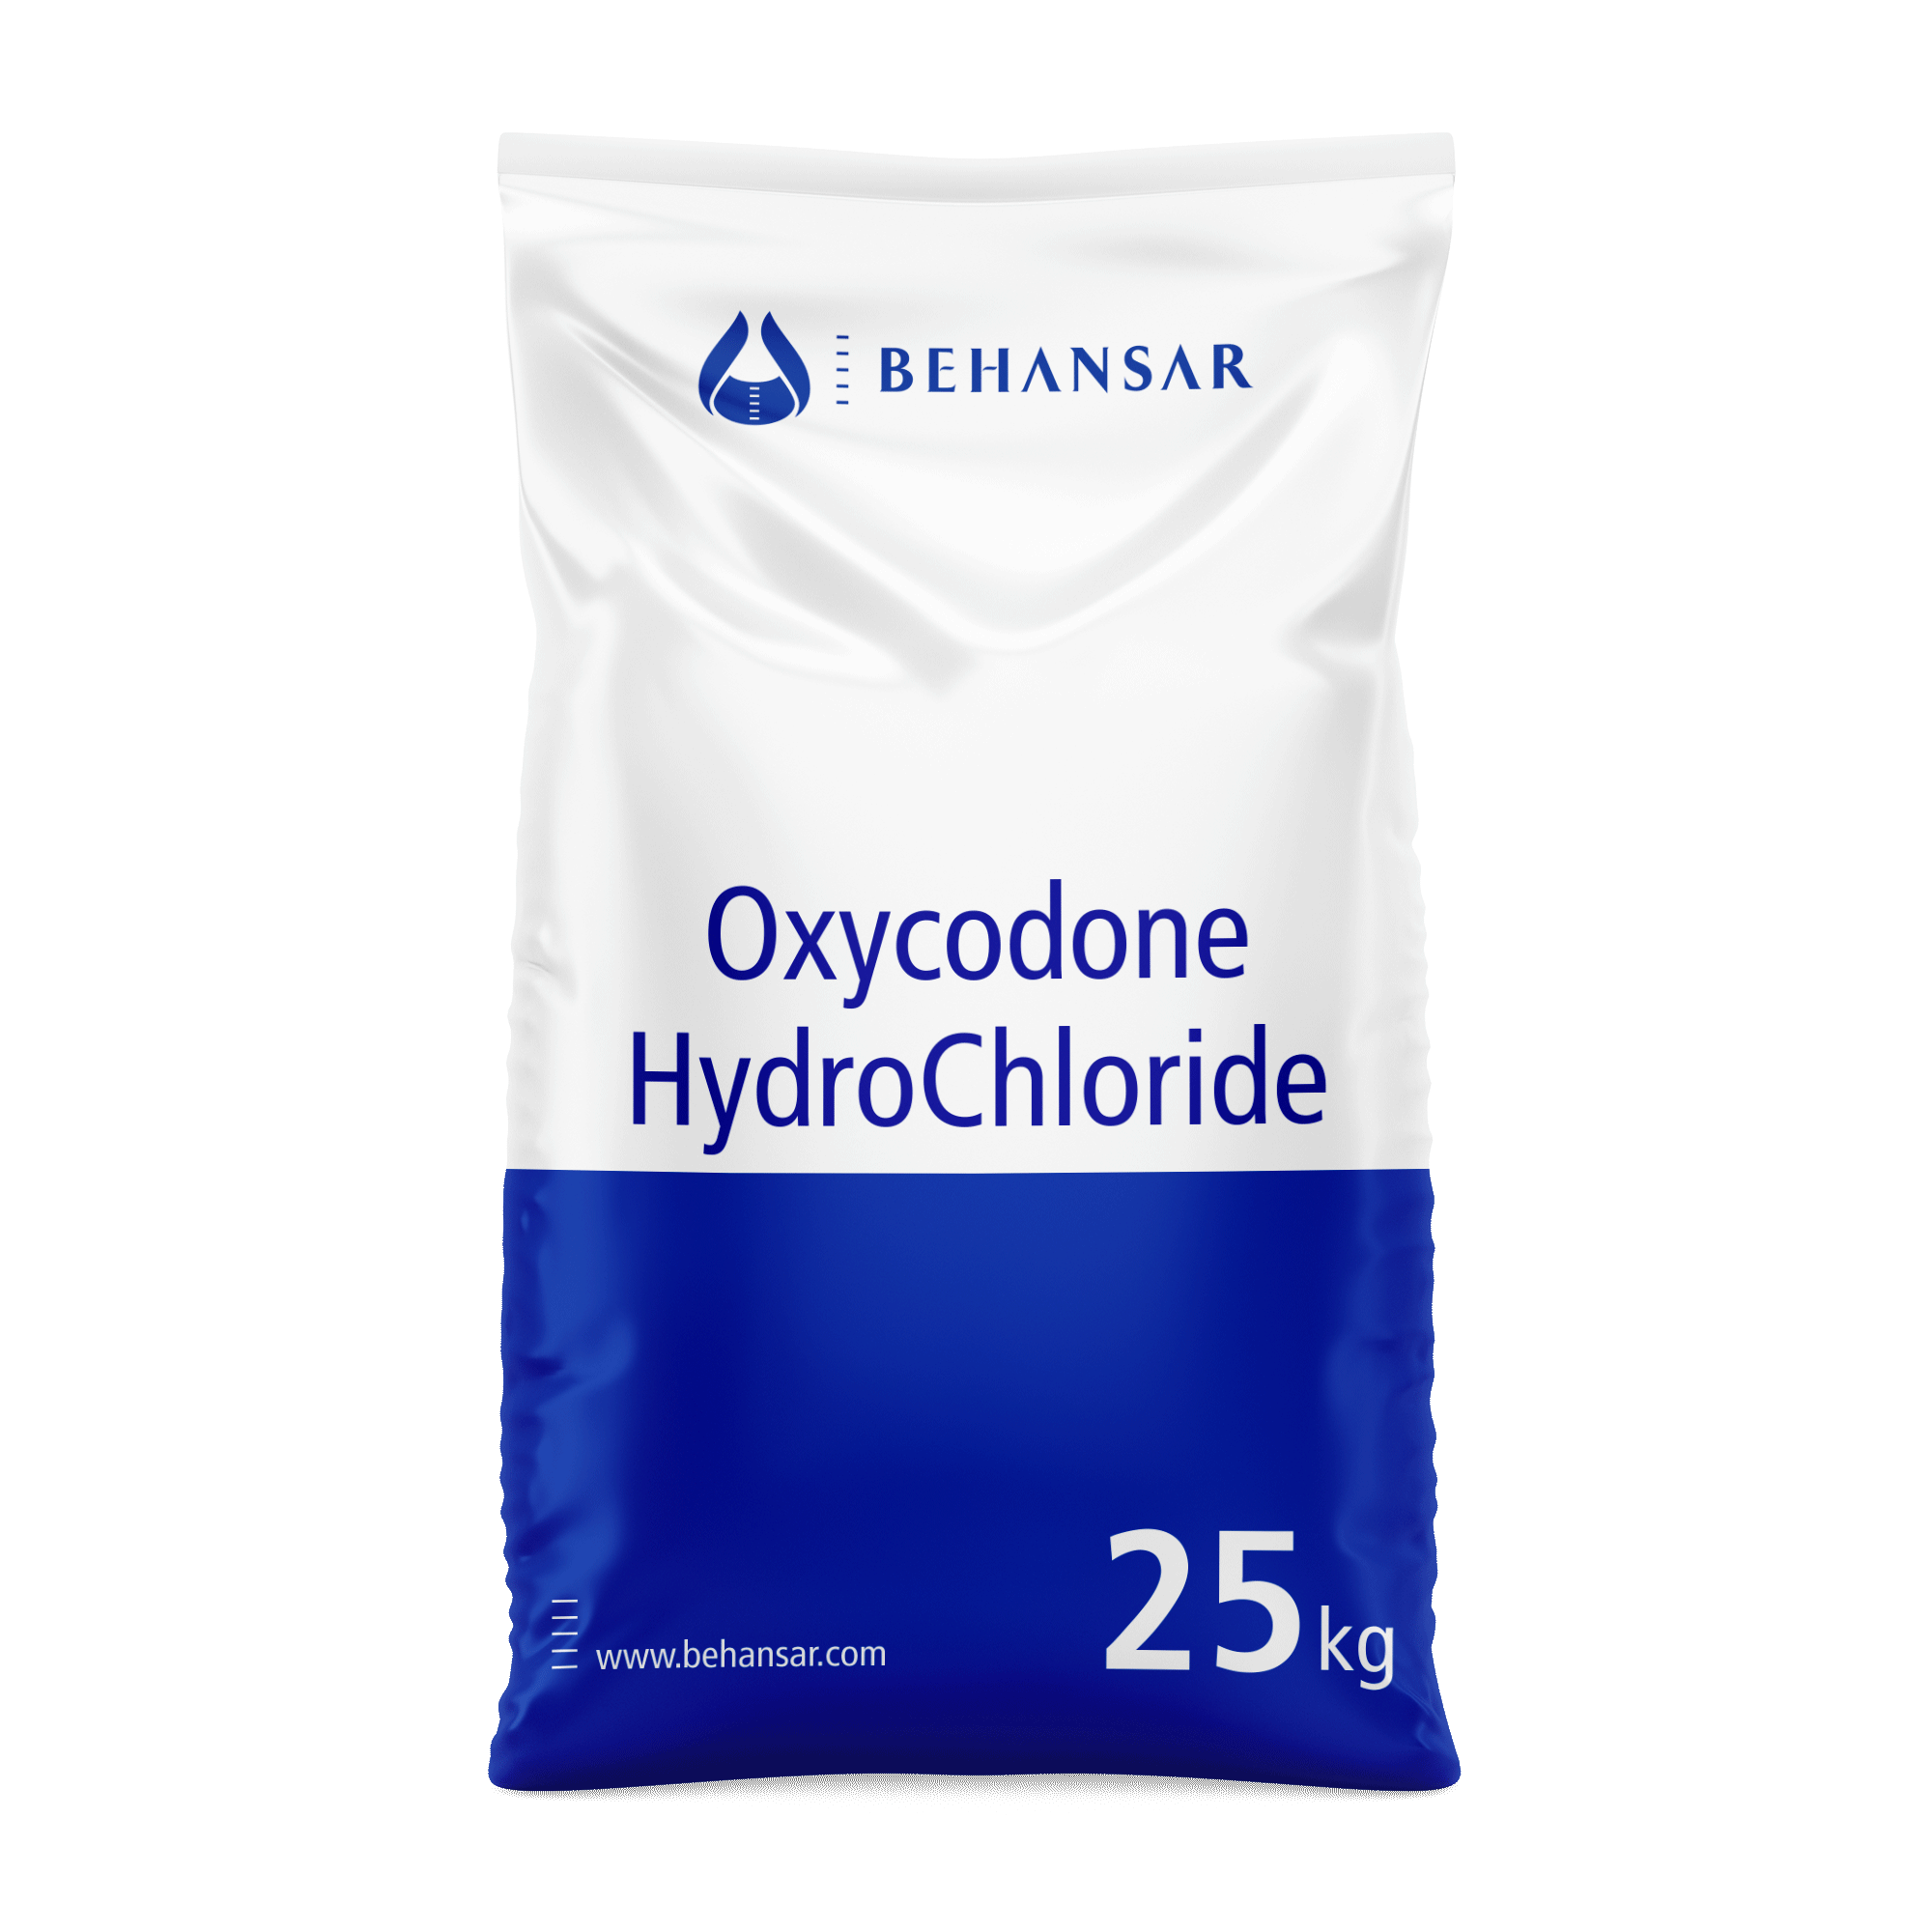 Oxycodone HydroChloride is one of the products of Behansar Co